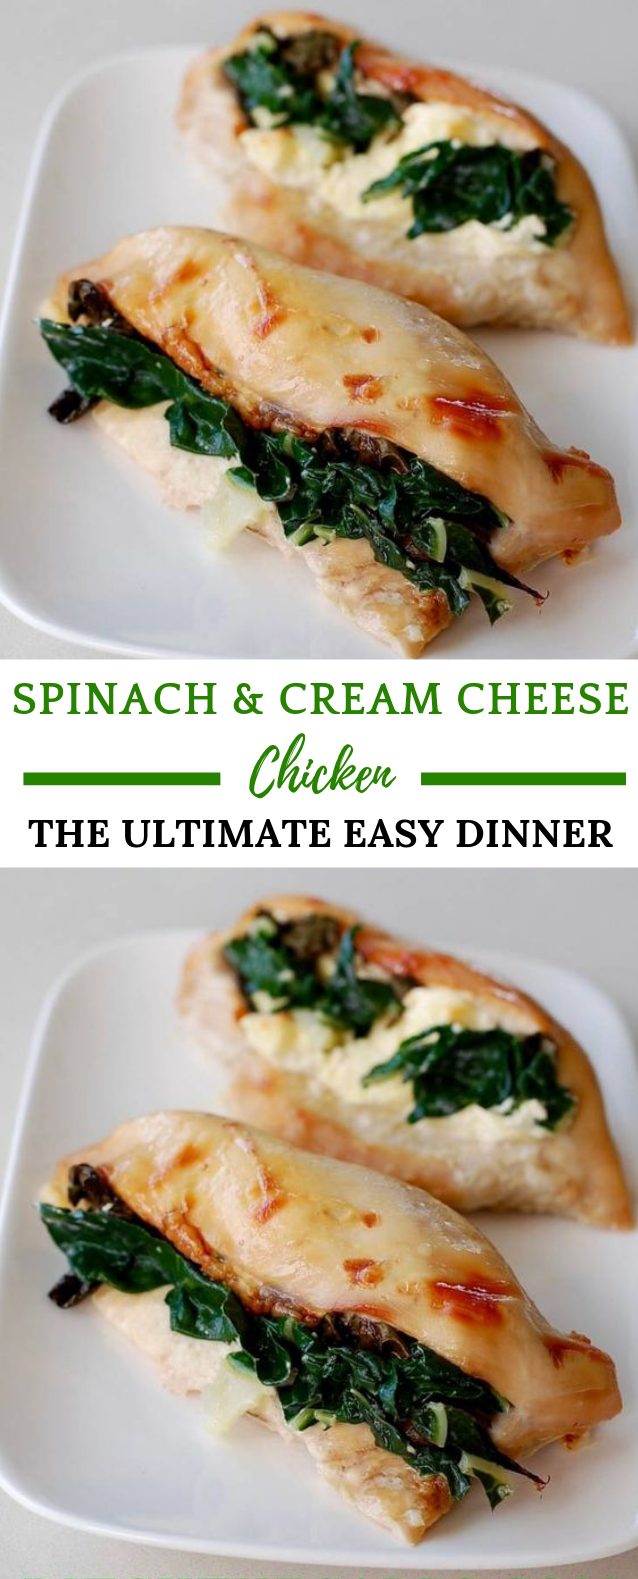 KETO SPINACH STUFFED CHICKEN #LowCarb #Diet